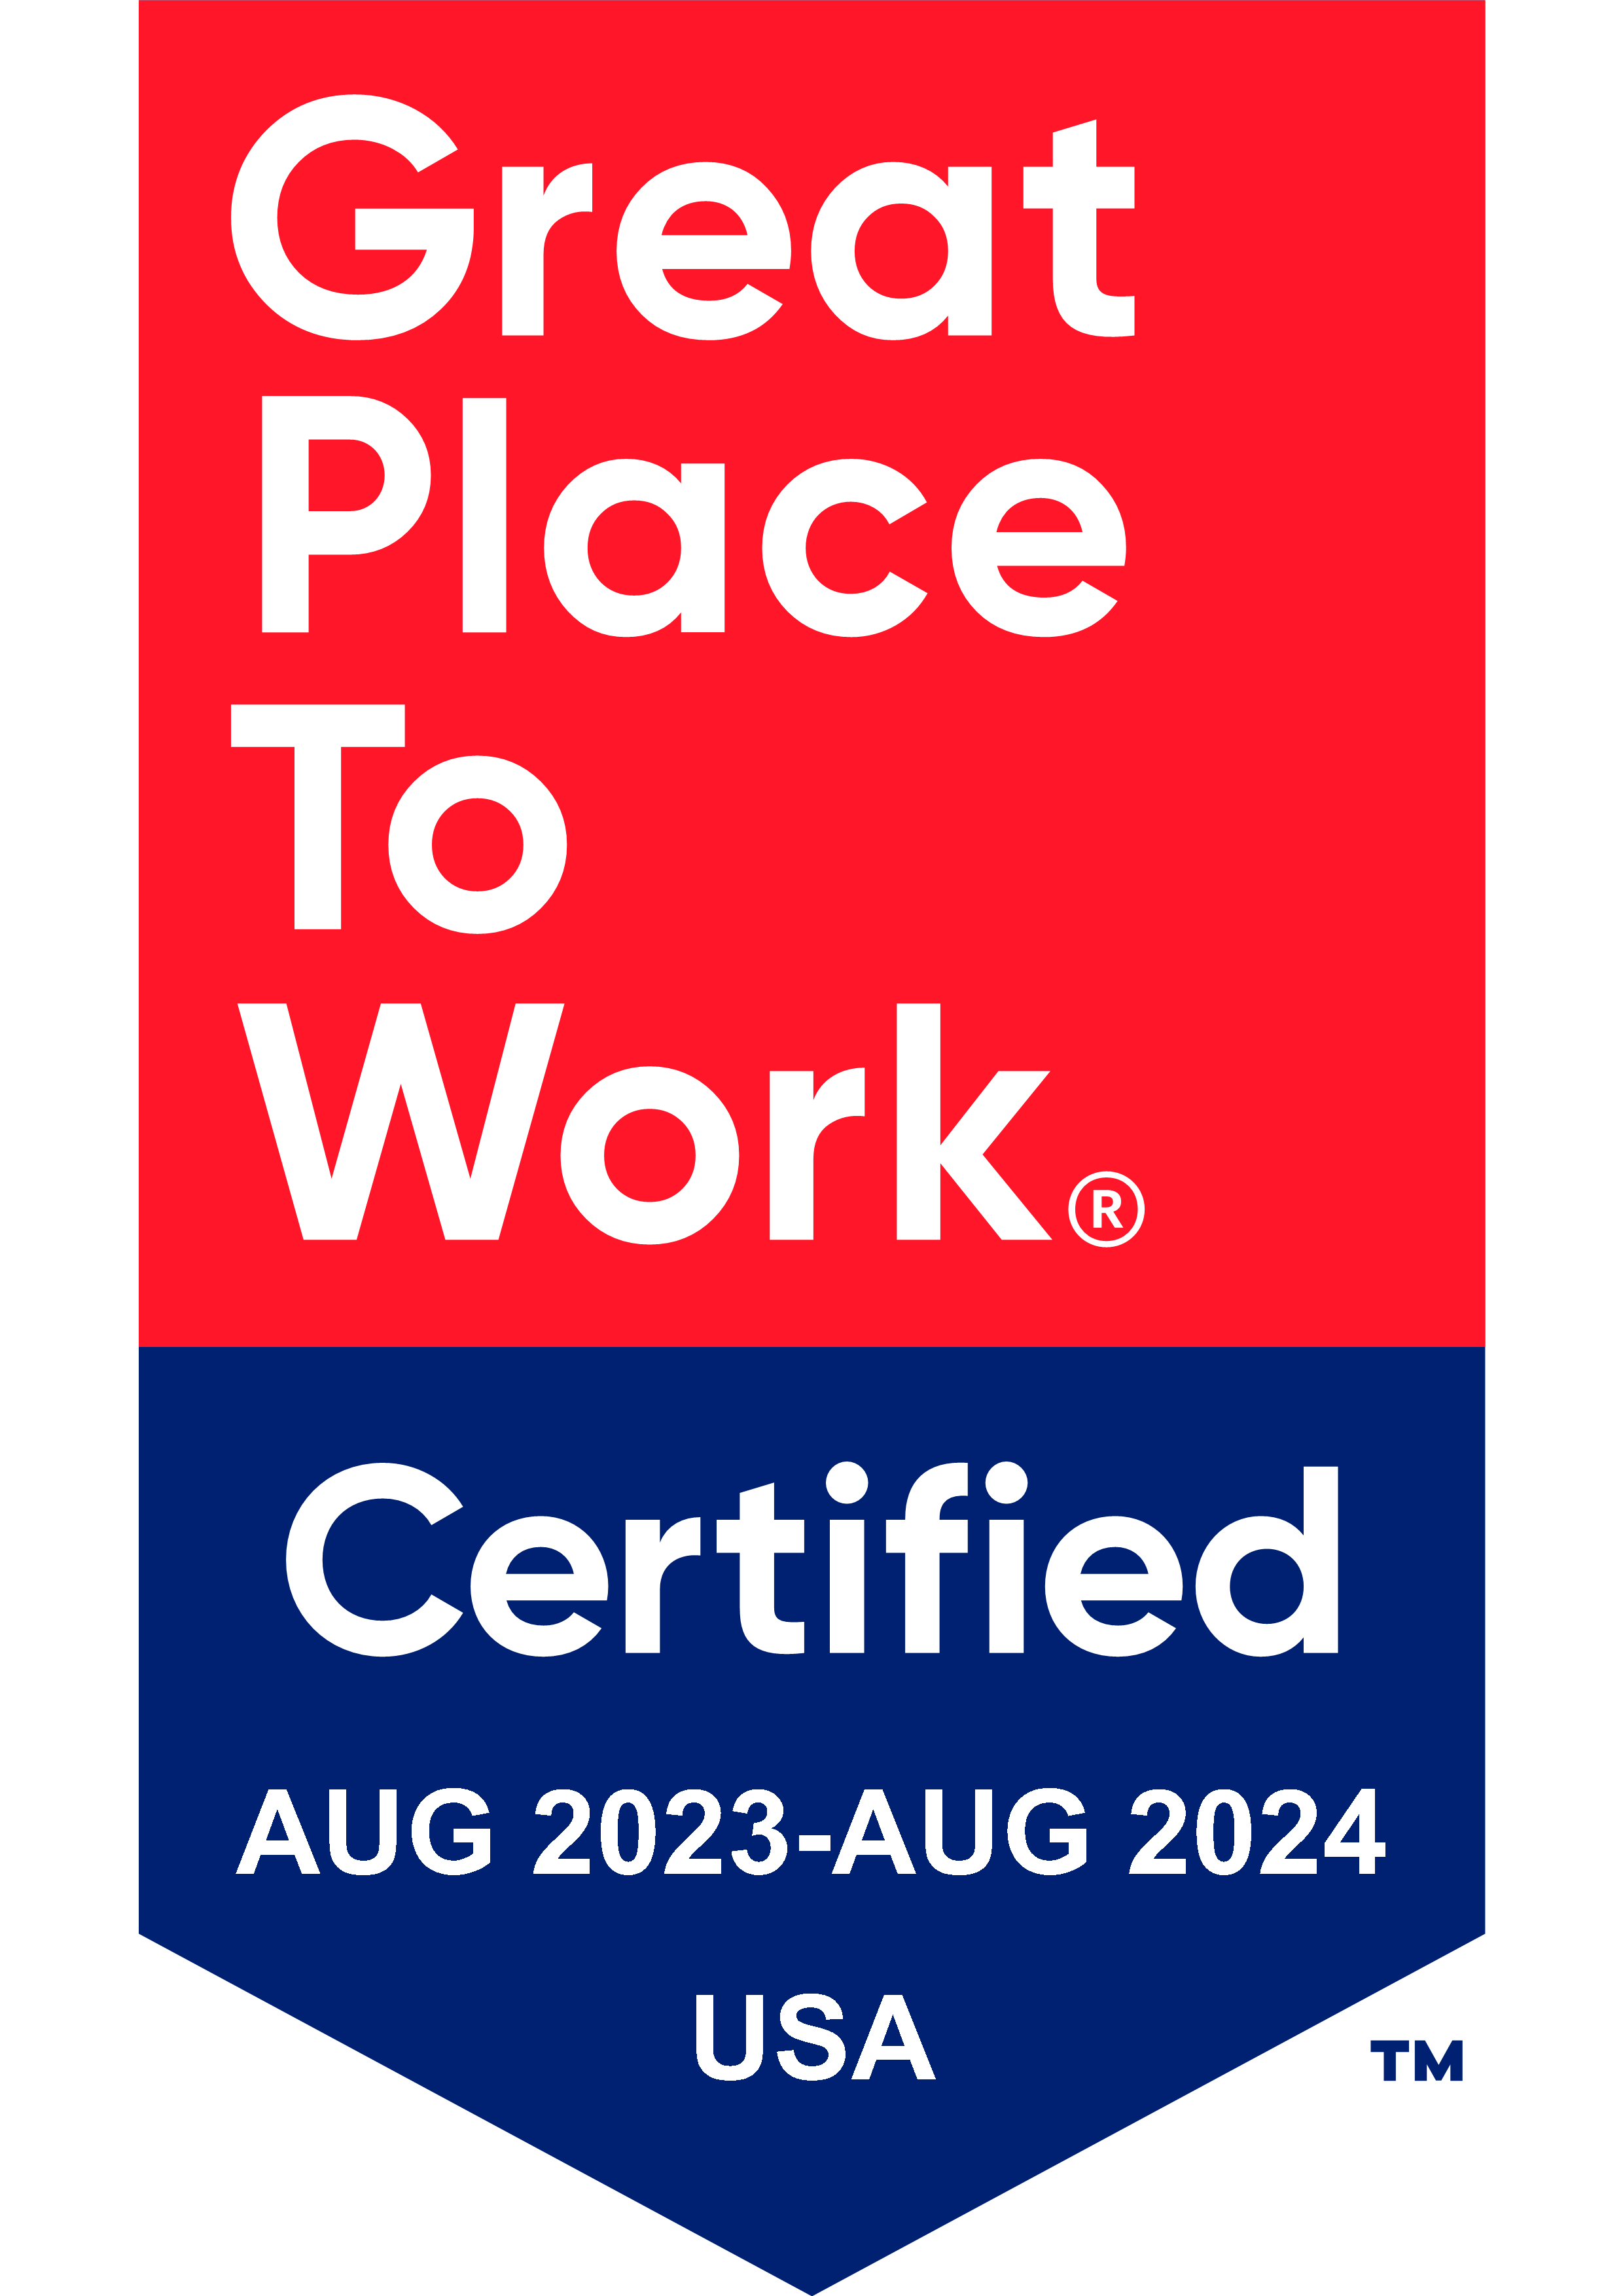 Metabolon recognized as a Great Place To Work 2023-2024